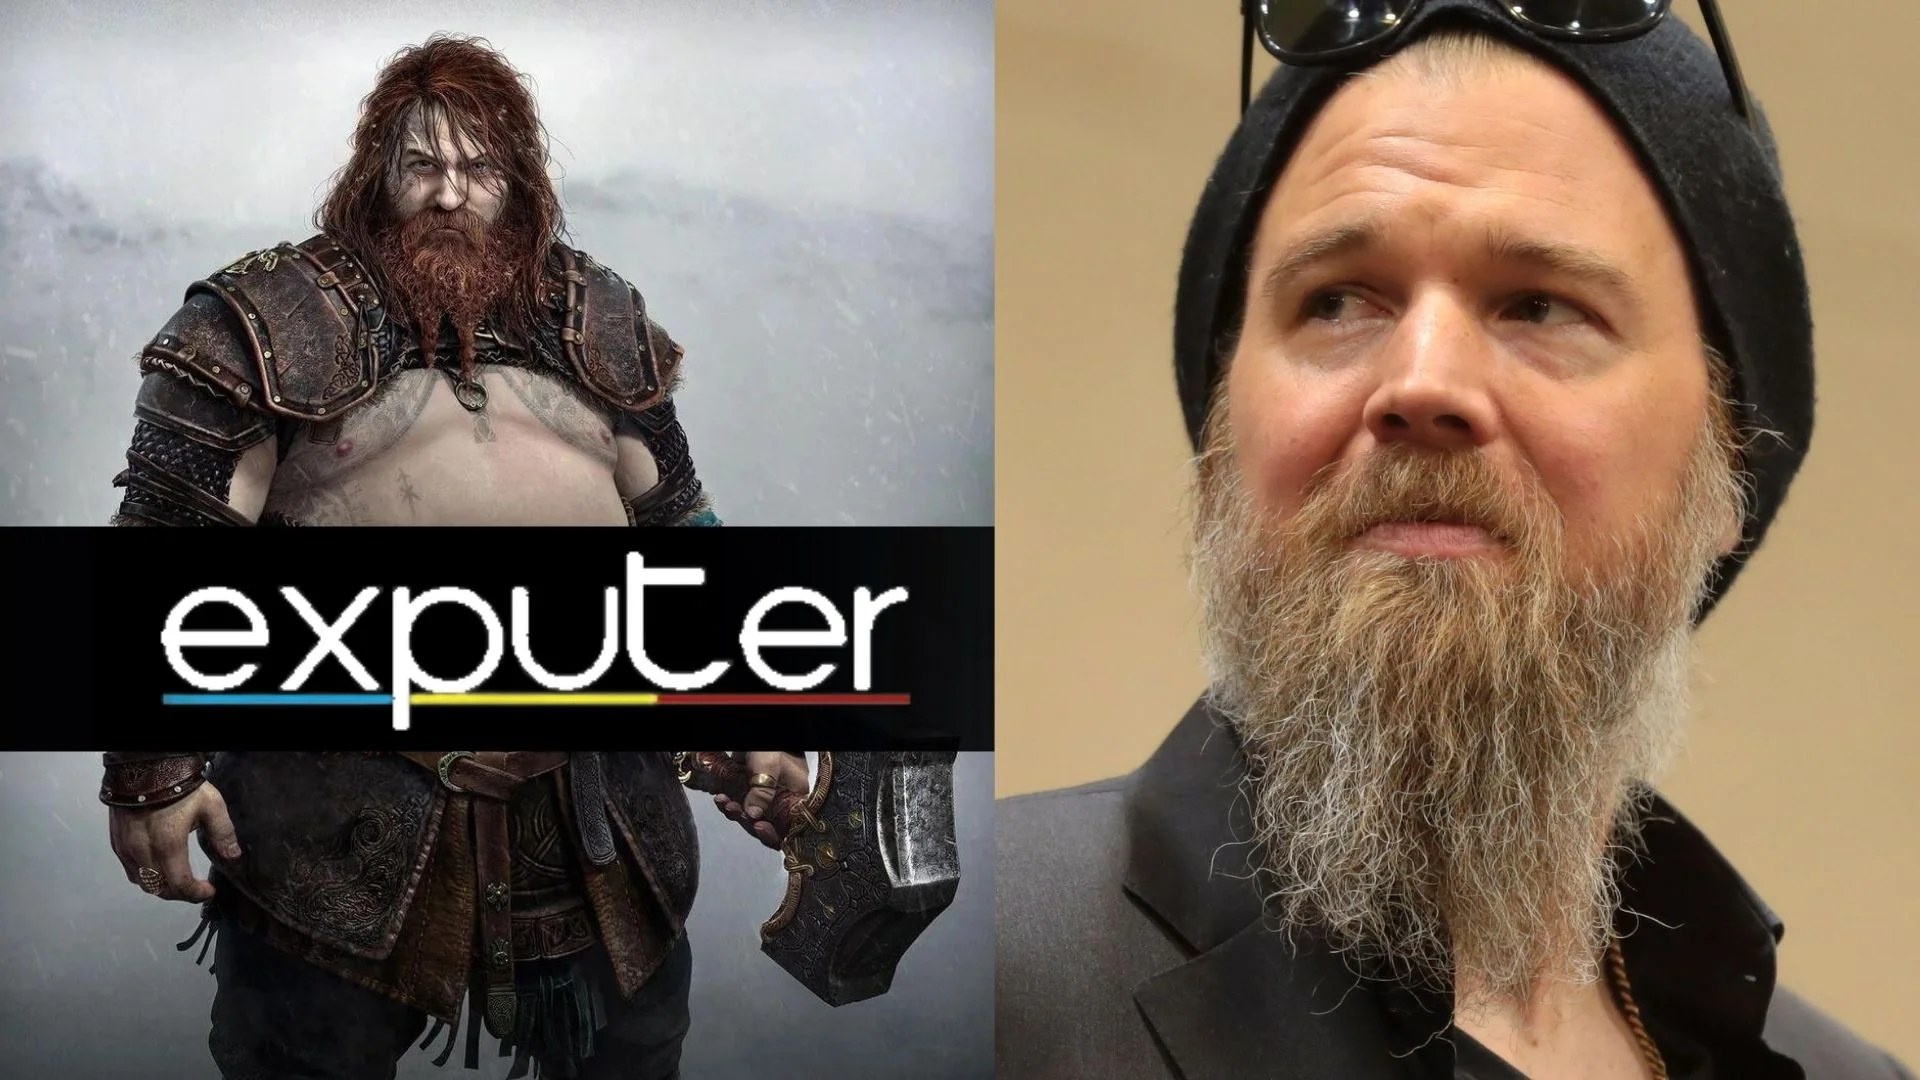 God of War Ragnarok Voice Actor has Completed Recording Lines for Thor